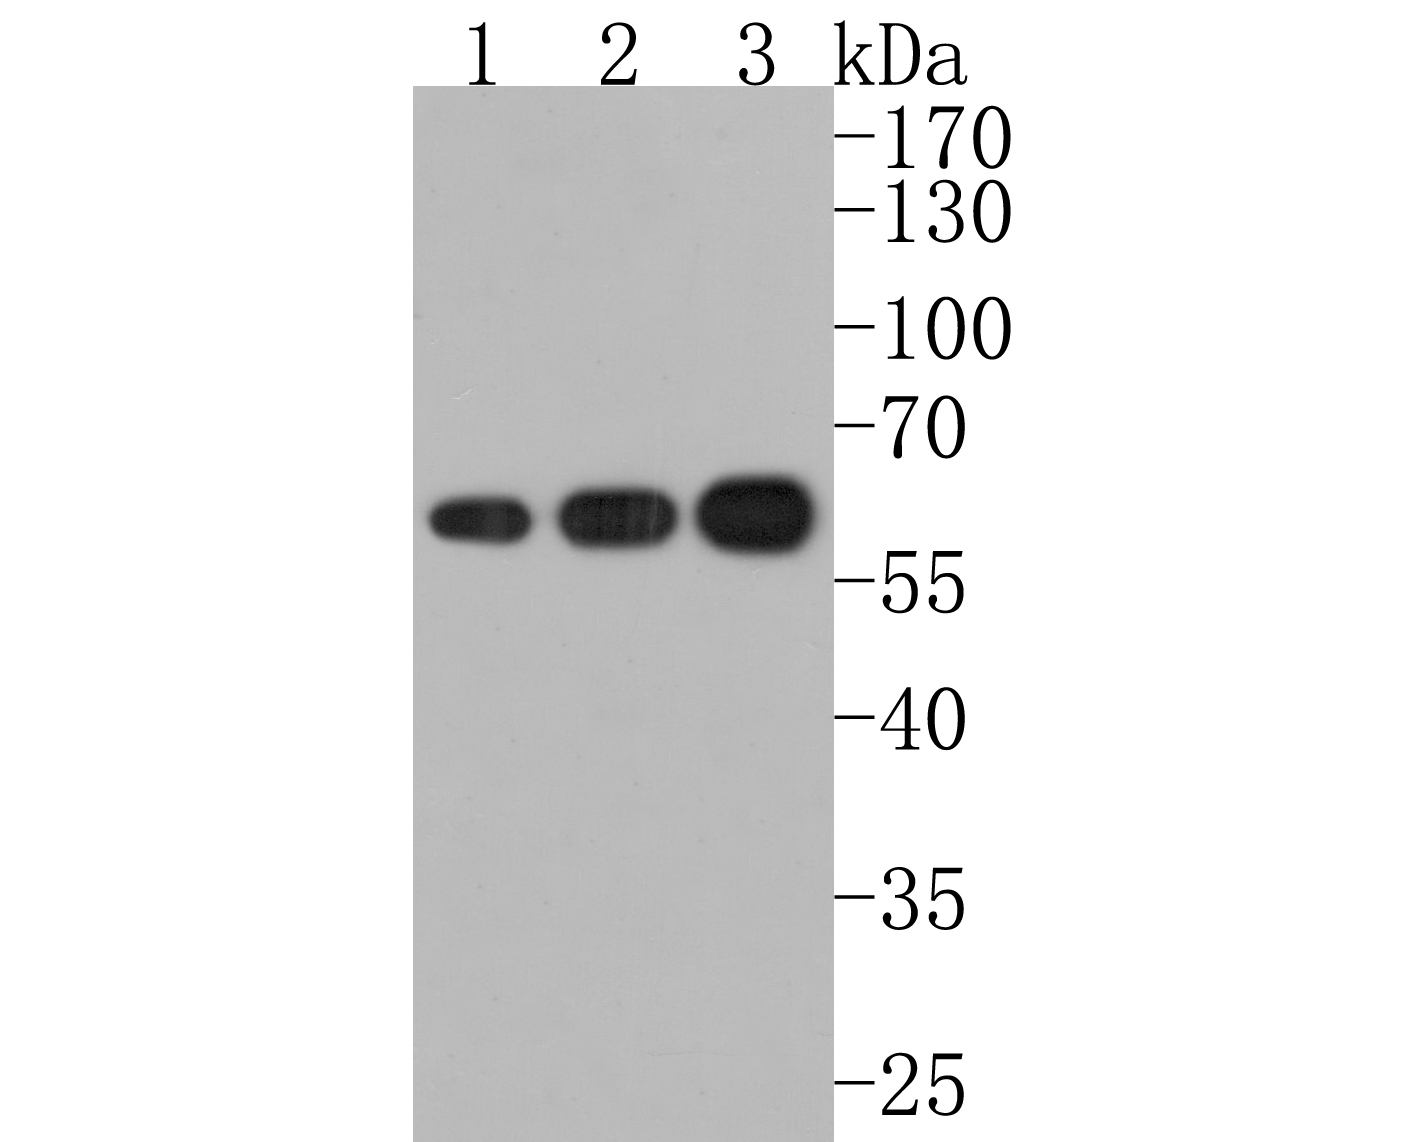 Western blot analysis of FTO on different lysates. Proteins were transferred to a PVDF membrane and blocked with 5% BSA in PBS for 1 hour at room temperature. The primary antibody (ET1705-89, 1/500) was used in 5% BSA at room temperature for 2 hours. Goat Anti-Rabbit IgG - HRP Secondary Antibody (HA1001) at 1:200,000 dilution was used for 1 hour at room temperature.<br />
Positive control: <br />
Lane 1: HepG2 cell lysate<br />
Lane 2: 293 cell lysate<br />
Lane 3: Human brain tissue lysate